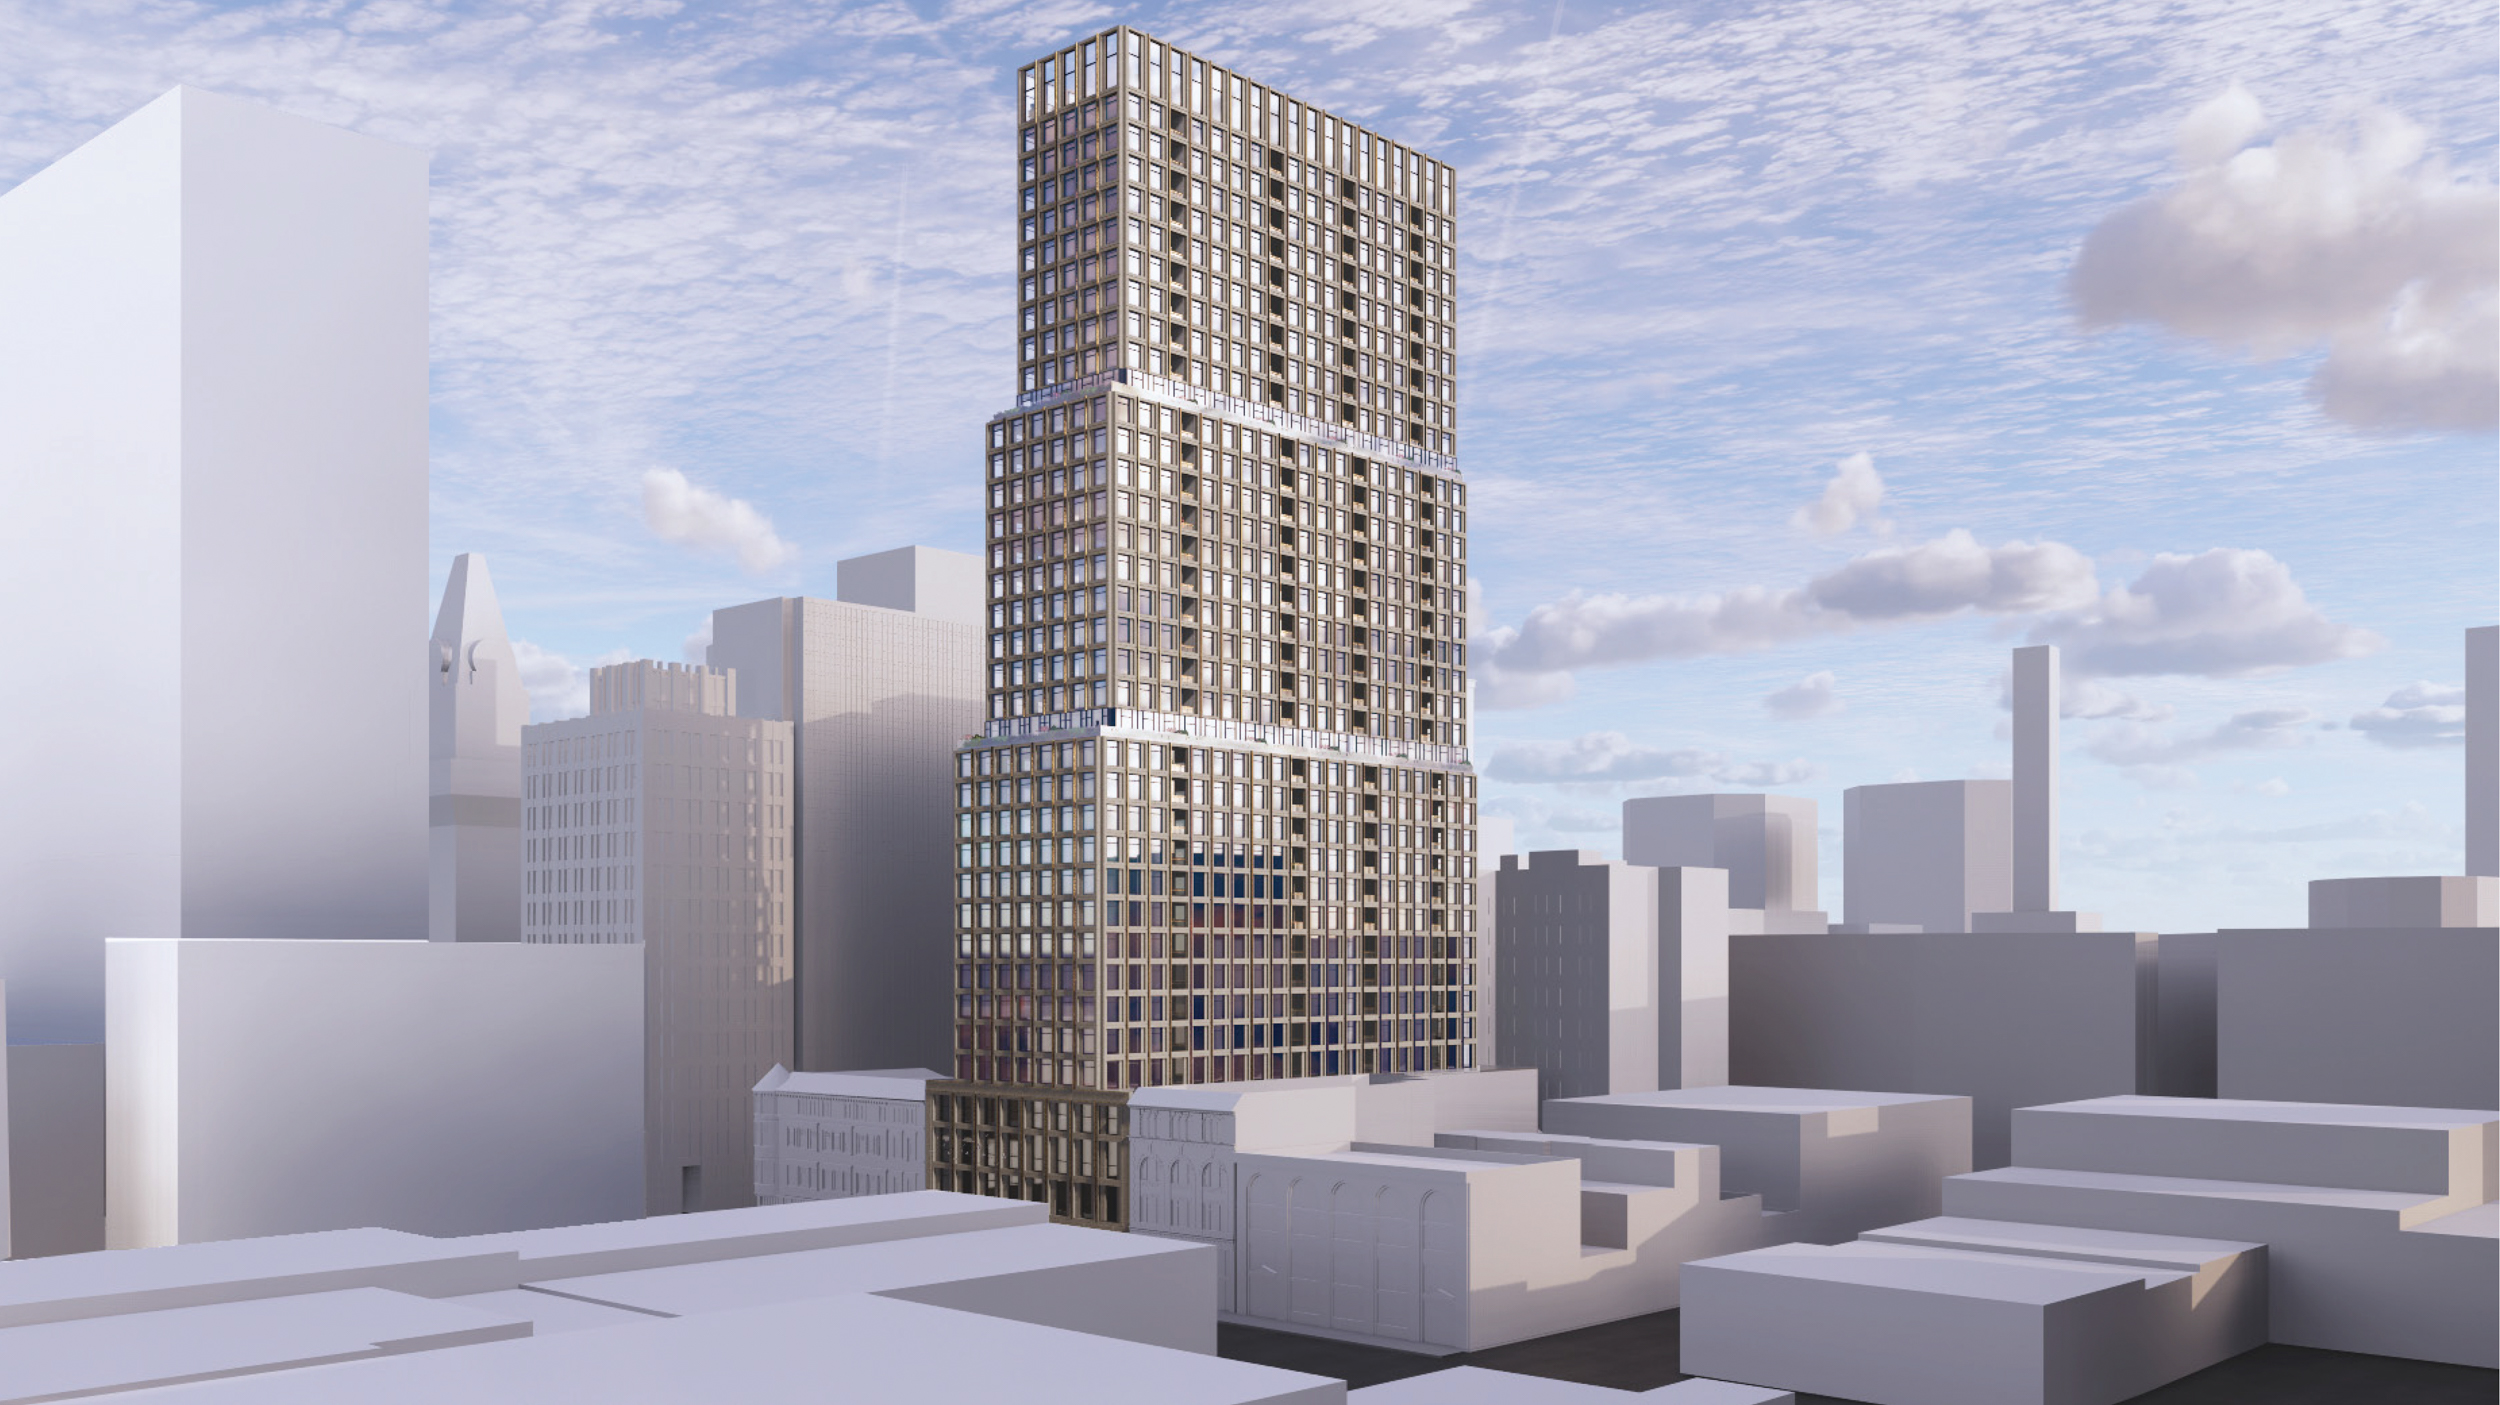 1431 Franklin Street residential aerial view, rendering by LARGE Architecture